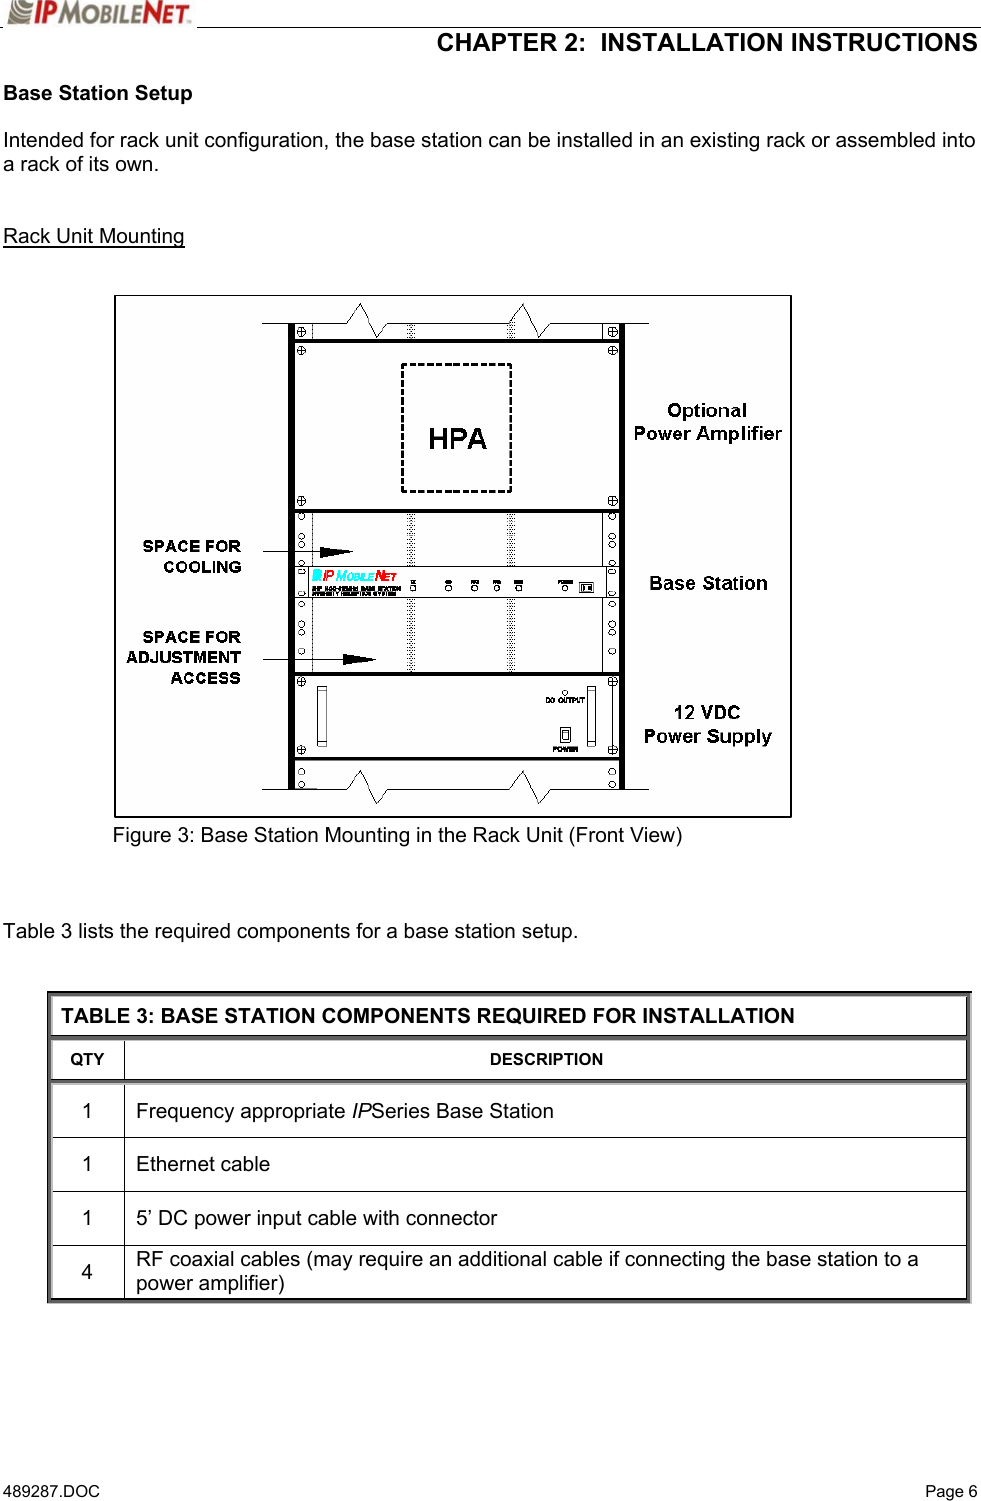  CHAPTER 2:  INSTALLATION INSTRUCTIONS  489287.DOC   Page 6 Base Station Setup  Intended for rack unit configuration, the base station can be installed in an existing rack or assembled into a rack of its own.   Rack Unit Mounting                               Figure 3: Base Station Mounting in the Rack Unit (Front View)    Table 3 lists the required components for a base station setup.   TABLE 3: BASE STATION COMPONENTS REQUIRED FOR INSTALLATION QTY DESCRIPTION 1 Frequency appropriate IPSeries Base Station 1 Ethernet cable 1  5’ DC power input cable with connector 4  RF coaxial cables (may require an additional cable if connecting the base station to a power amplifier)    